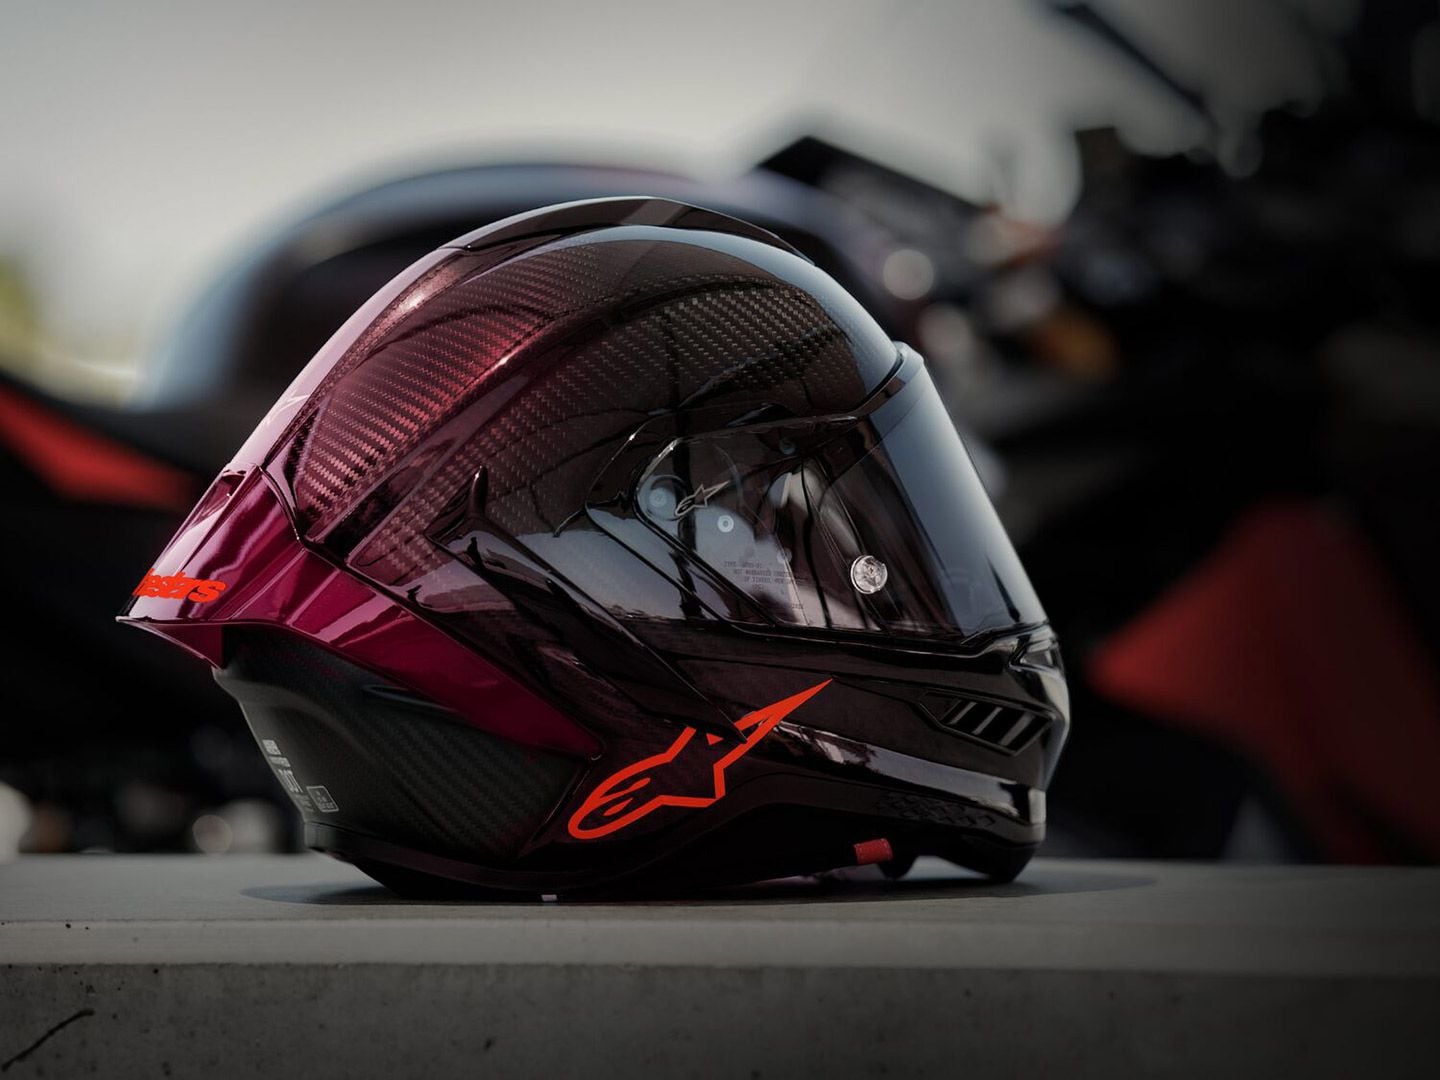 The Supertech R10 Launch Edition is easy on the eyes. Production is limited to just 200 helmets, but look for more S-R10 options down the road.